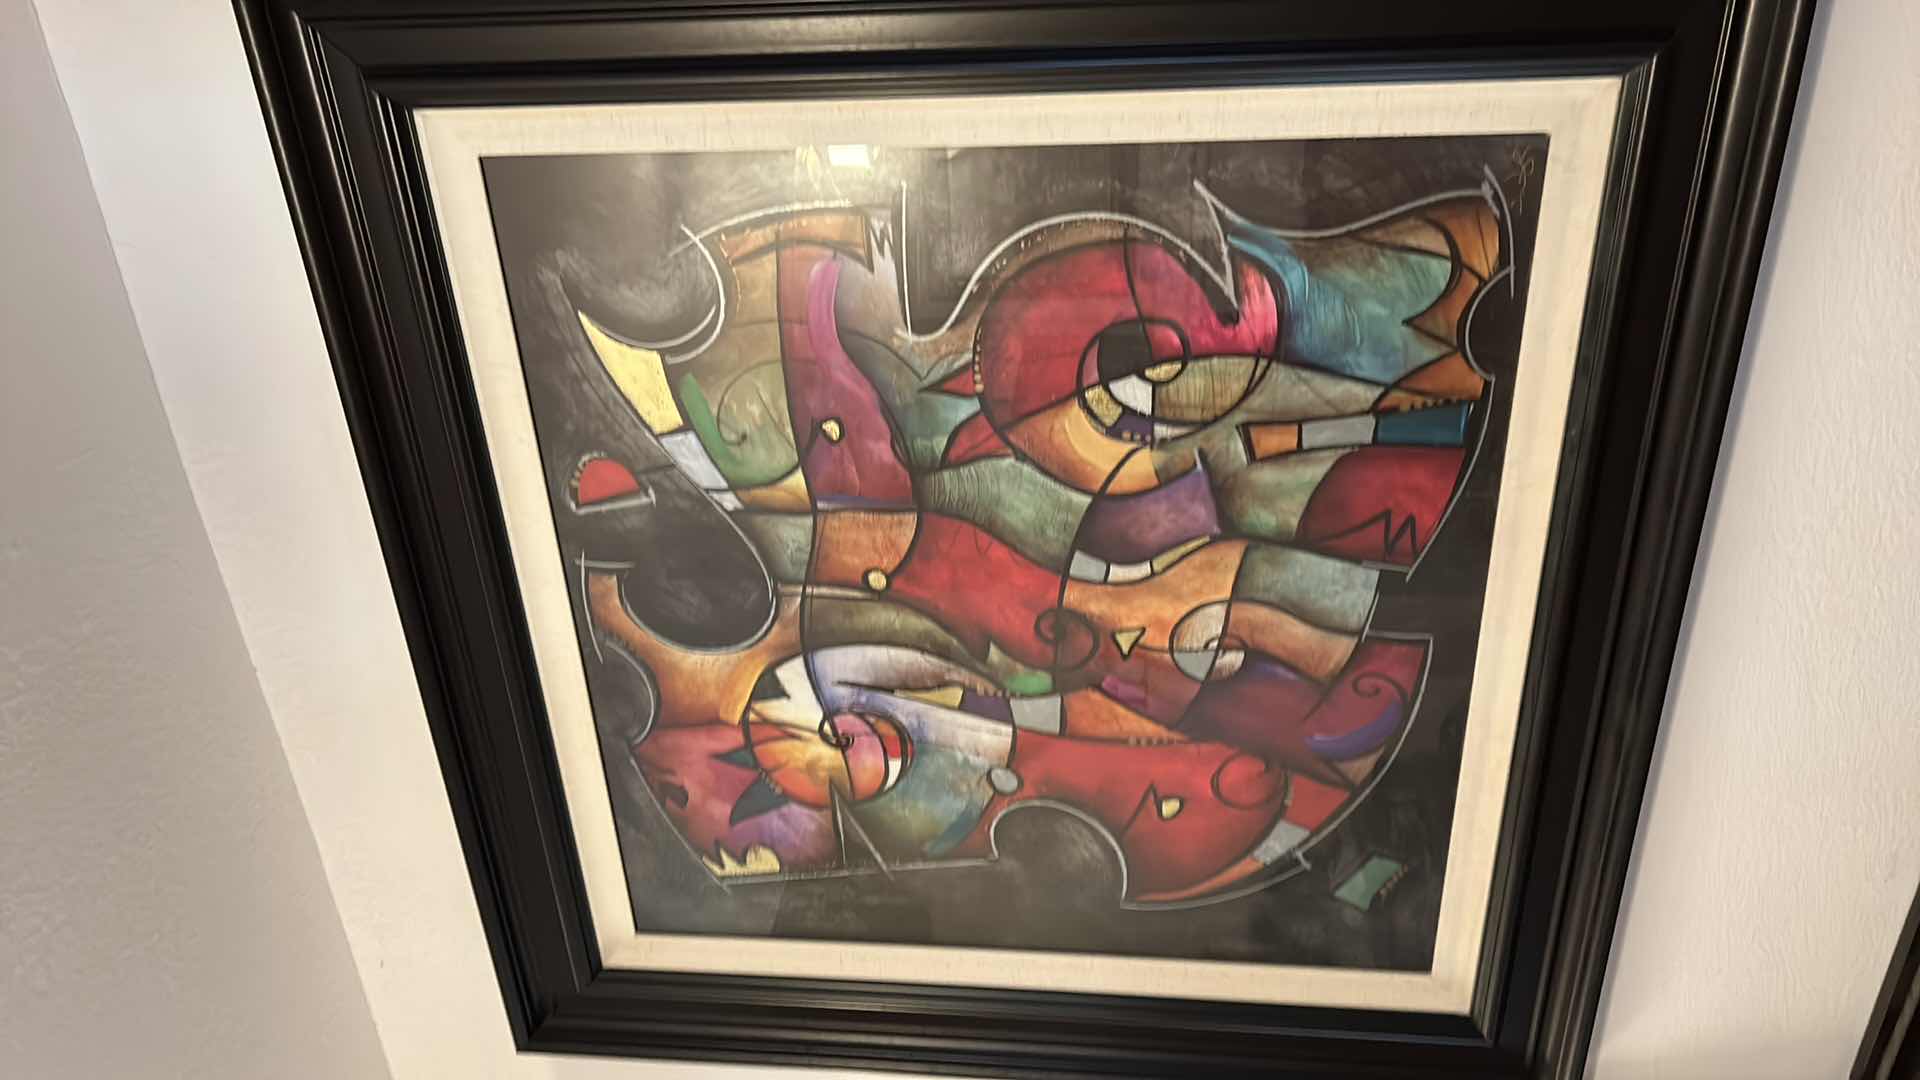 Photo 2 of SIGNED COLORFUL ABSTRACT ARTWORK BY ERIC WAUGH FRAMED 47 1/2” x 47 1/2”